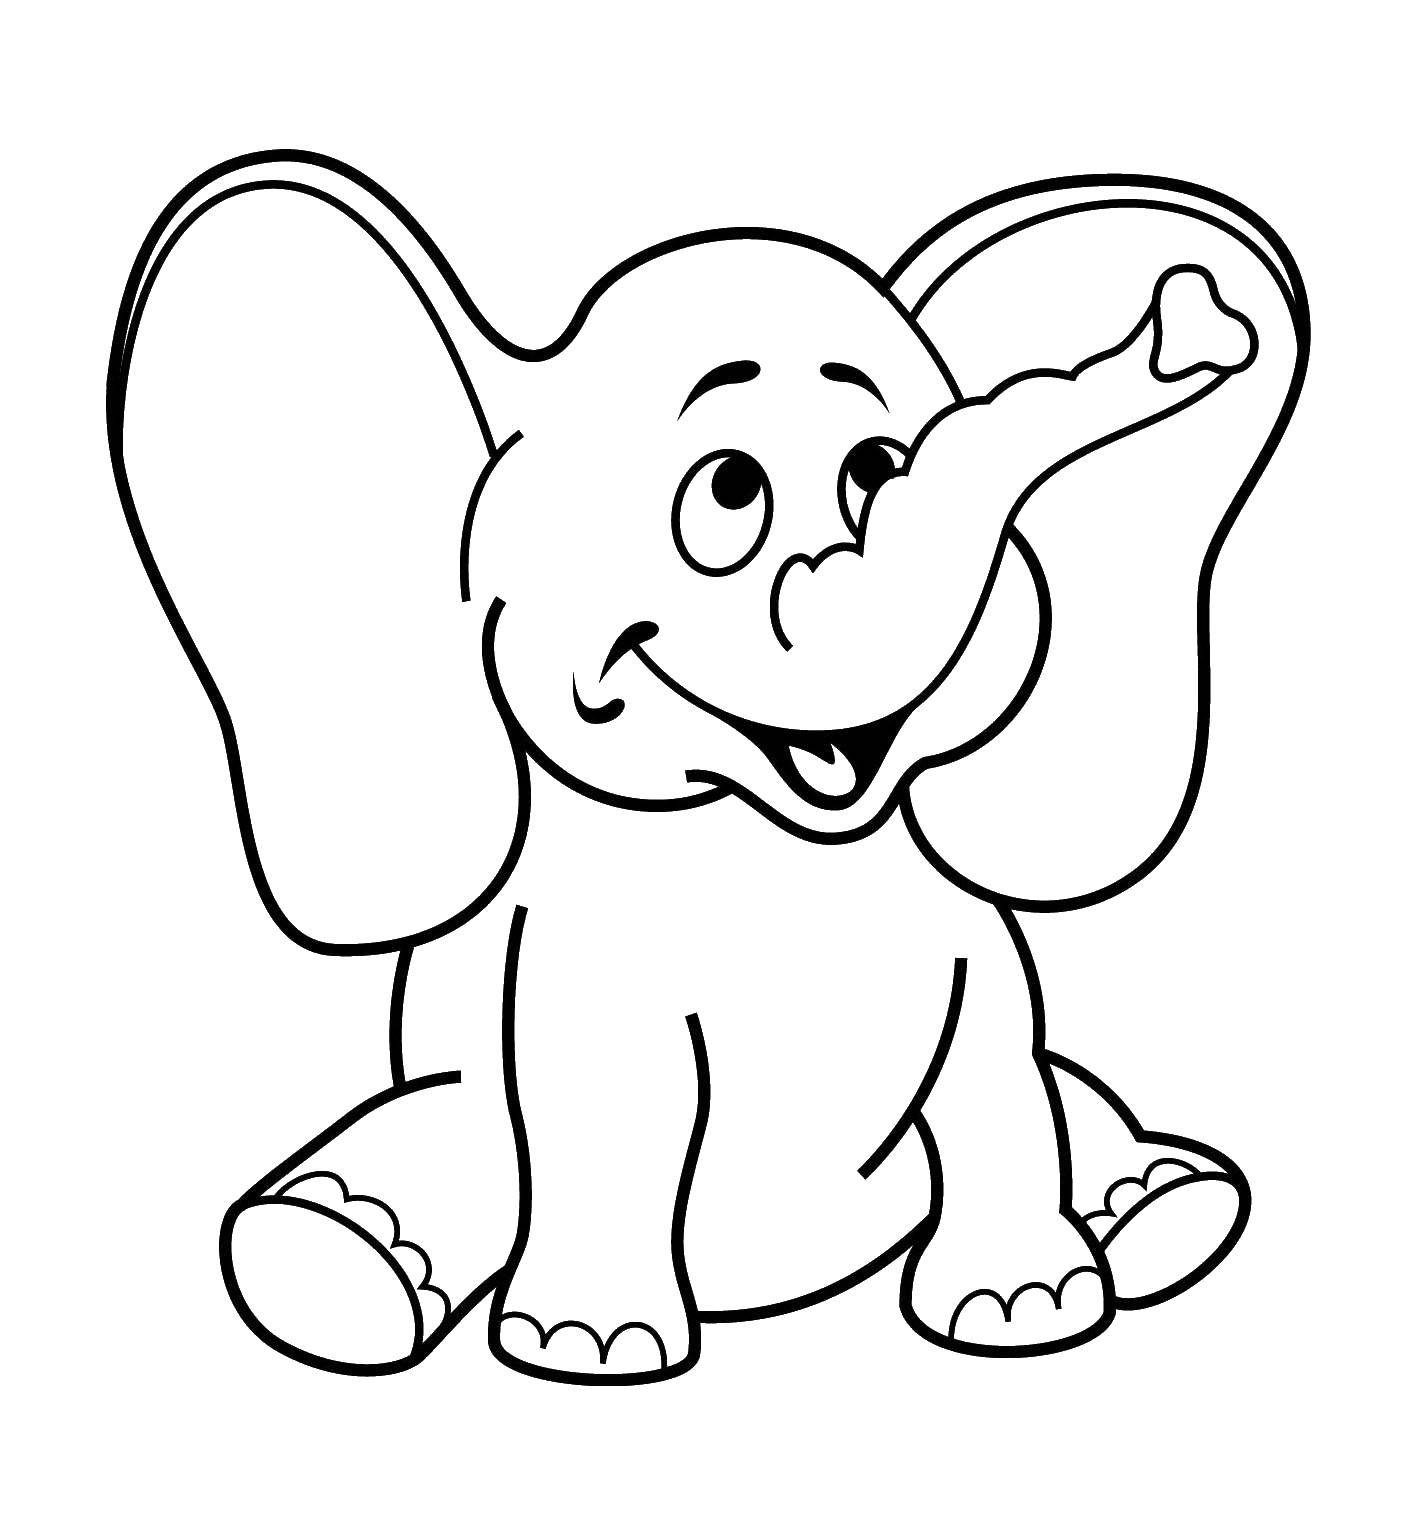 Coloring Elephant. Category Coloring pages for kids. Tags:  Elephant.